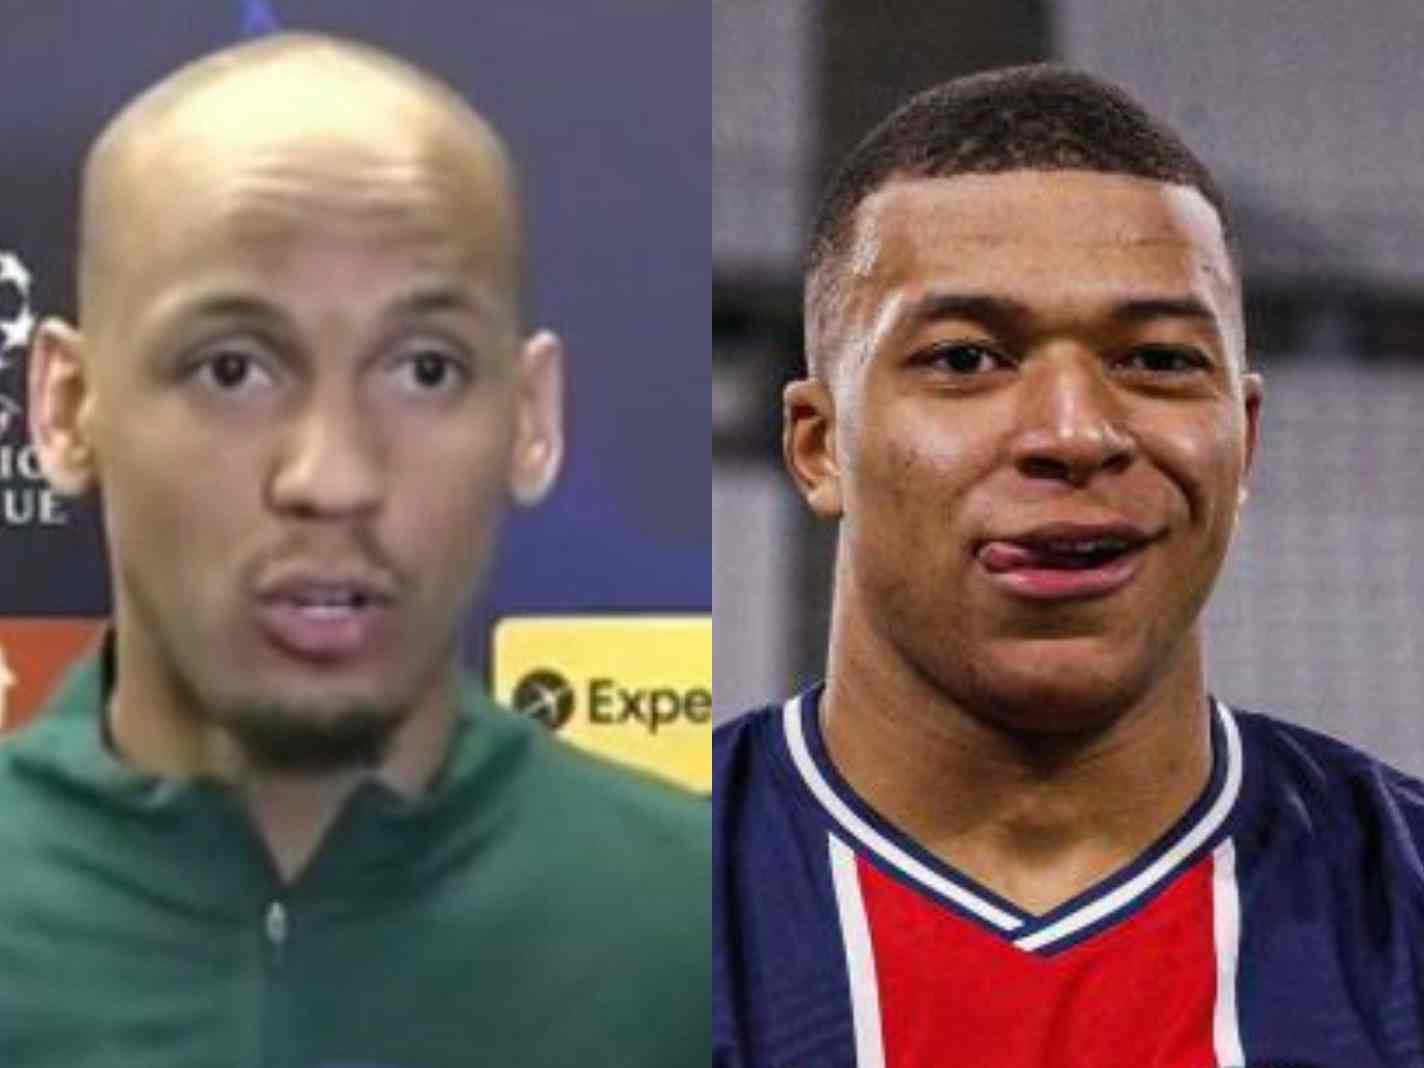 South America or Europe? Kylian Mbappe and Fabinho have a BEEF over which continent is better in football